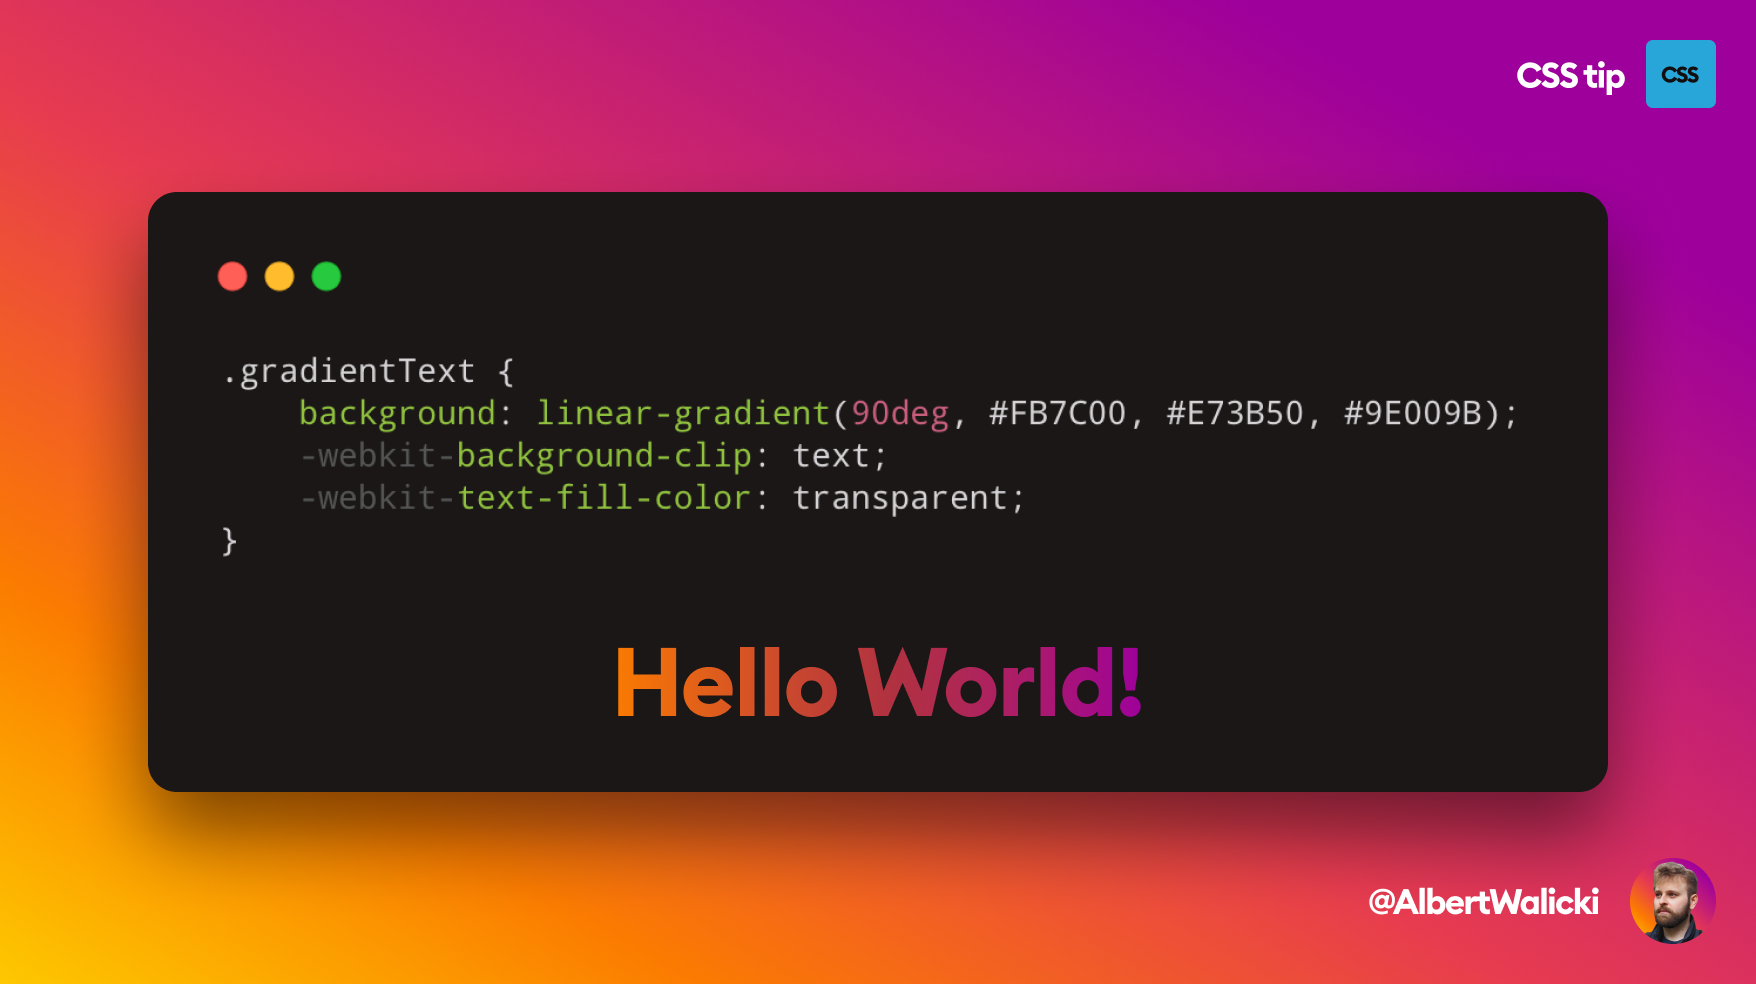 Gradient text created with CSS